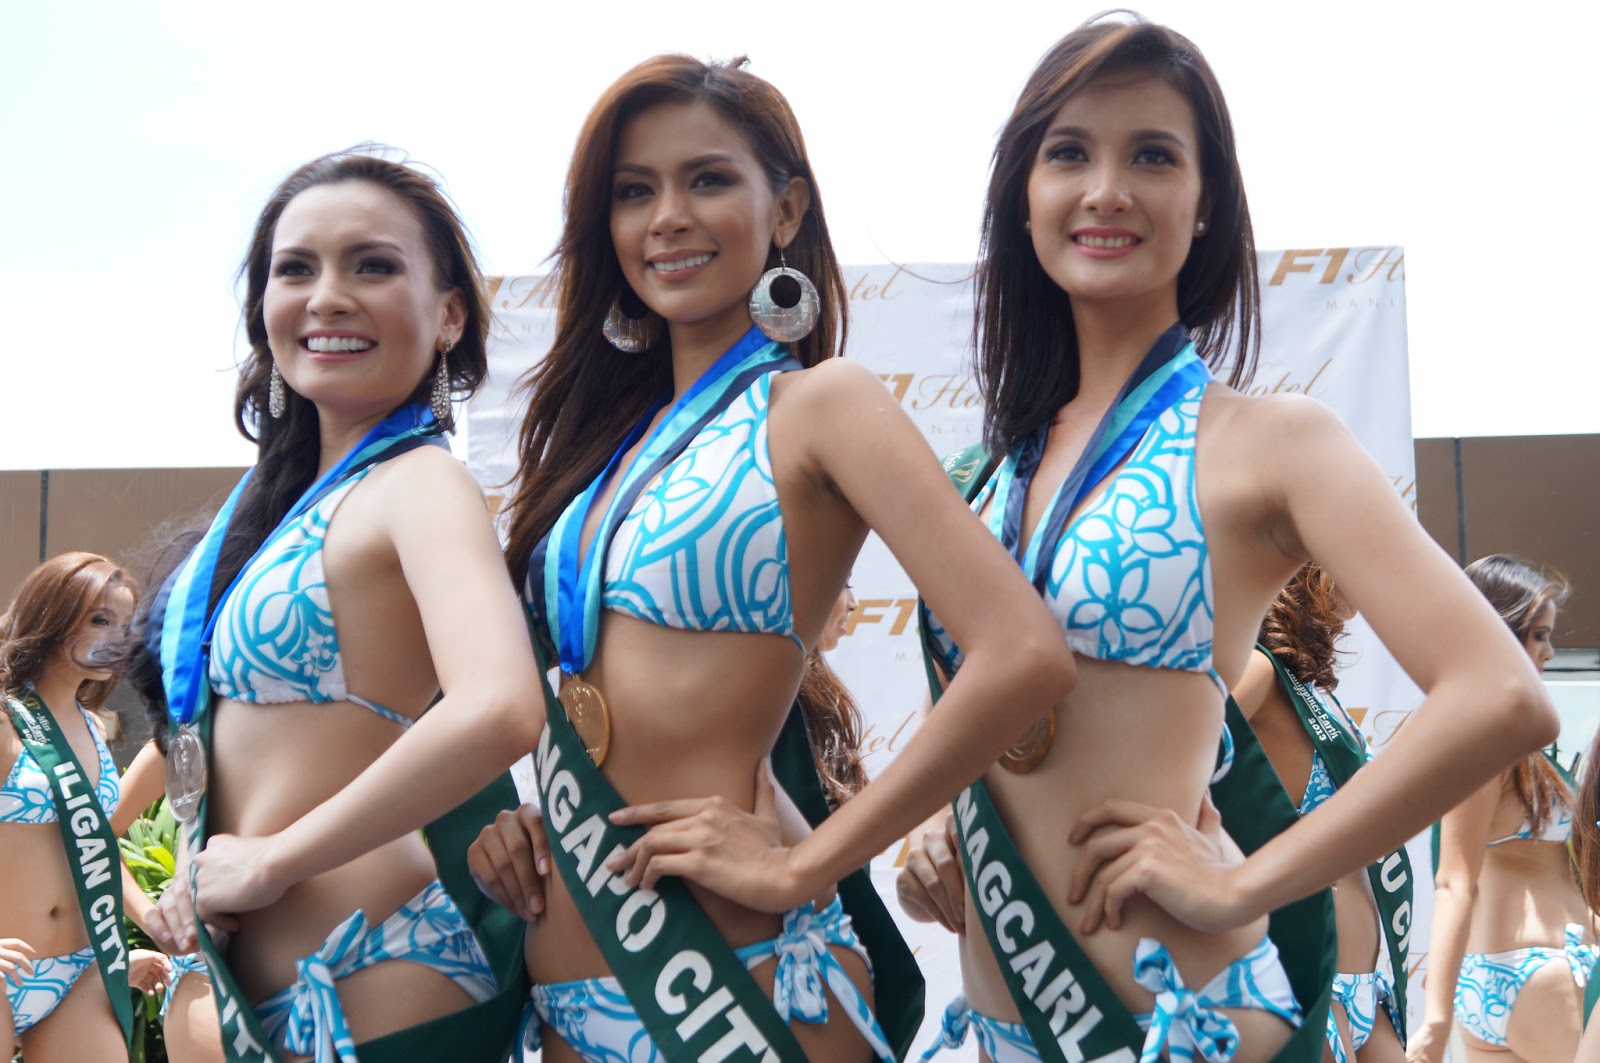 Miss Earth 2013 Presentation To The Media At The F1 Hotel ~ Wazzup Pilipinas News And Events